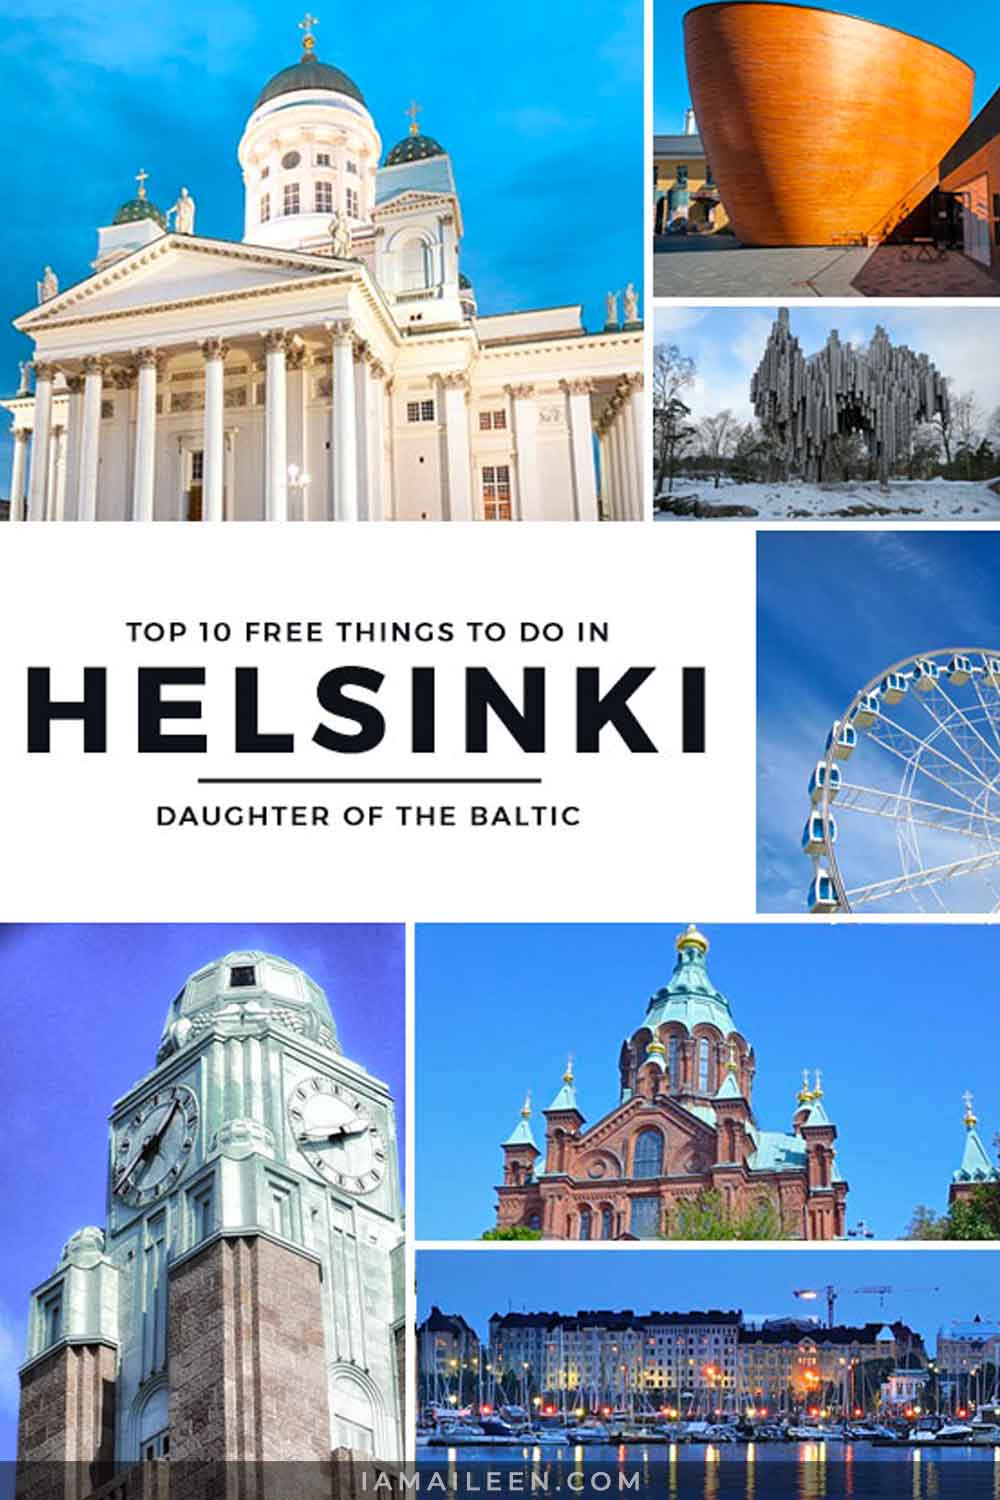 Top 10 FREE Things To Do in Helsinki